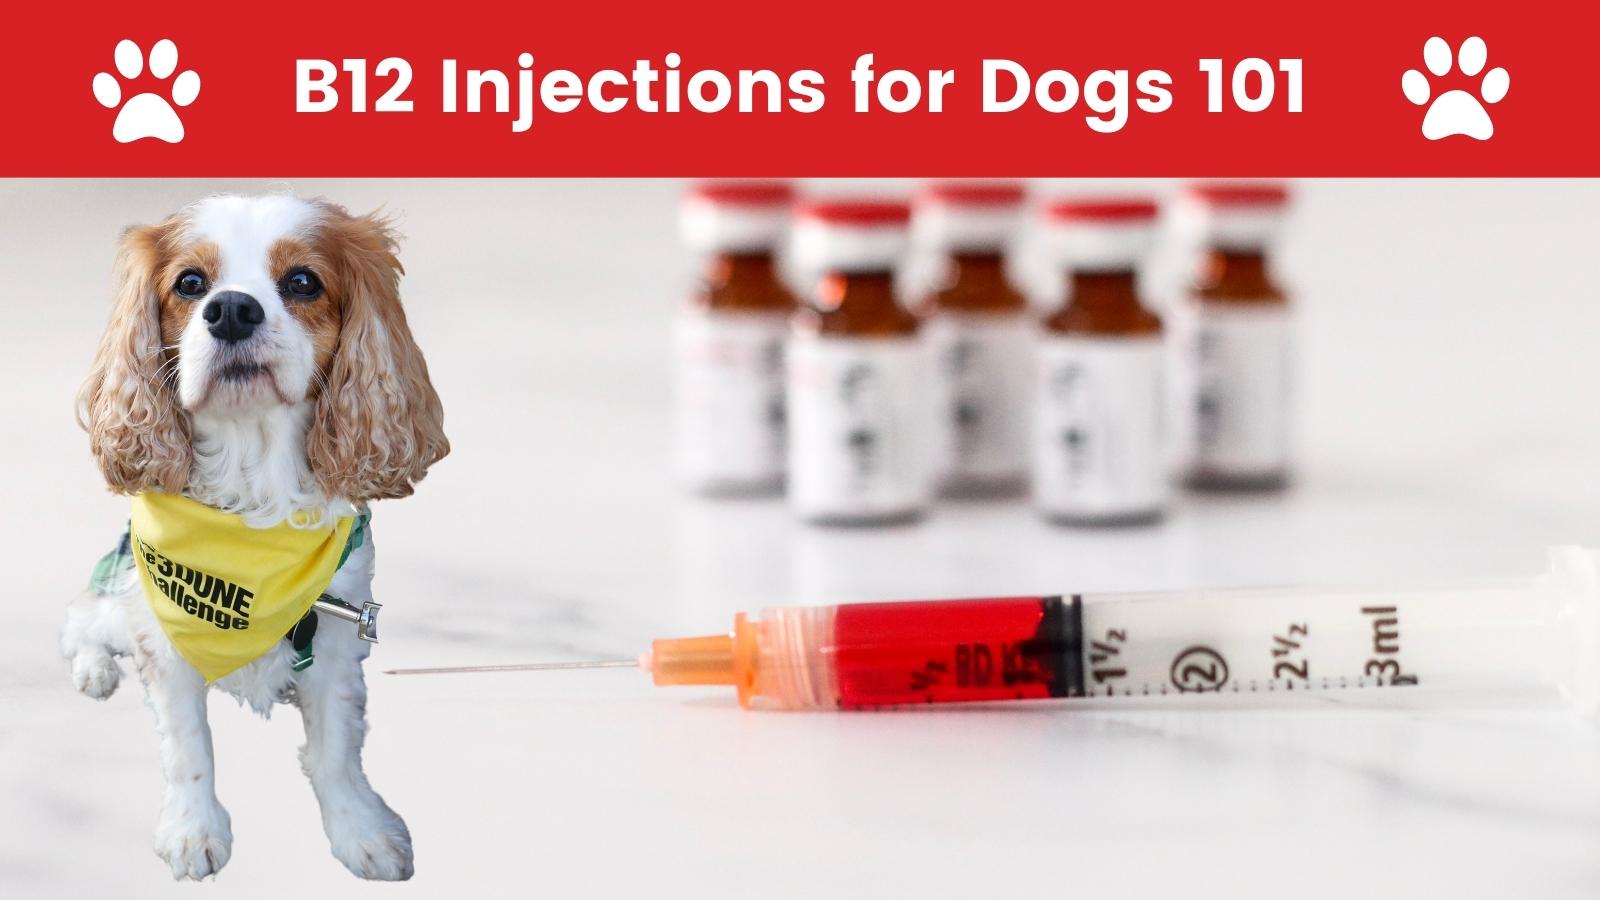 Benefits of B12 shots for dogs